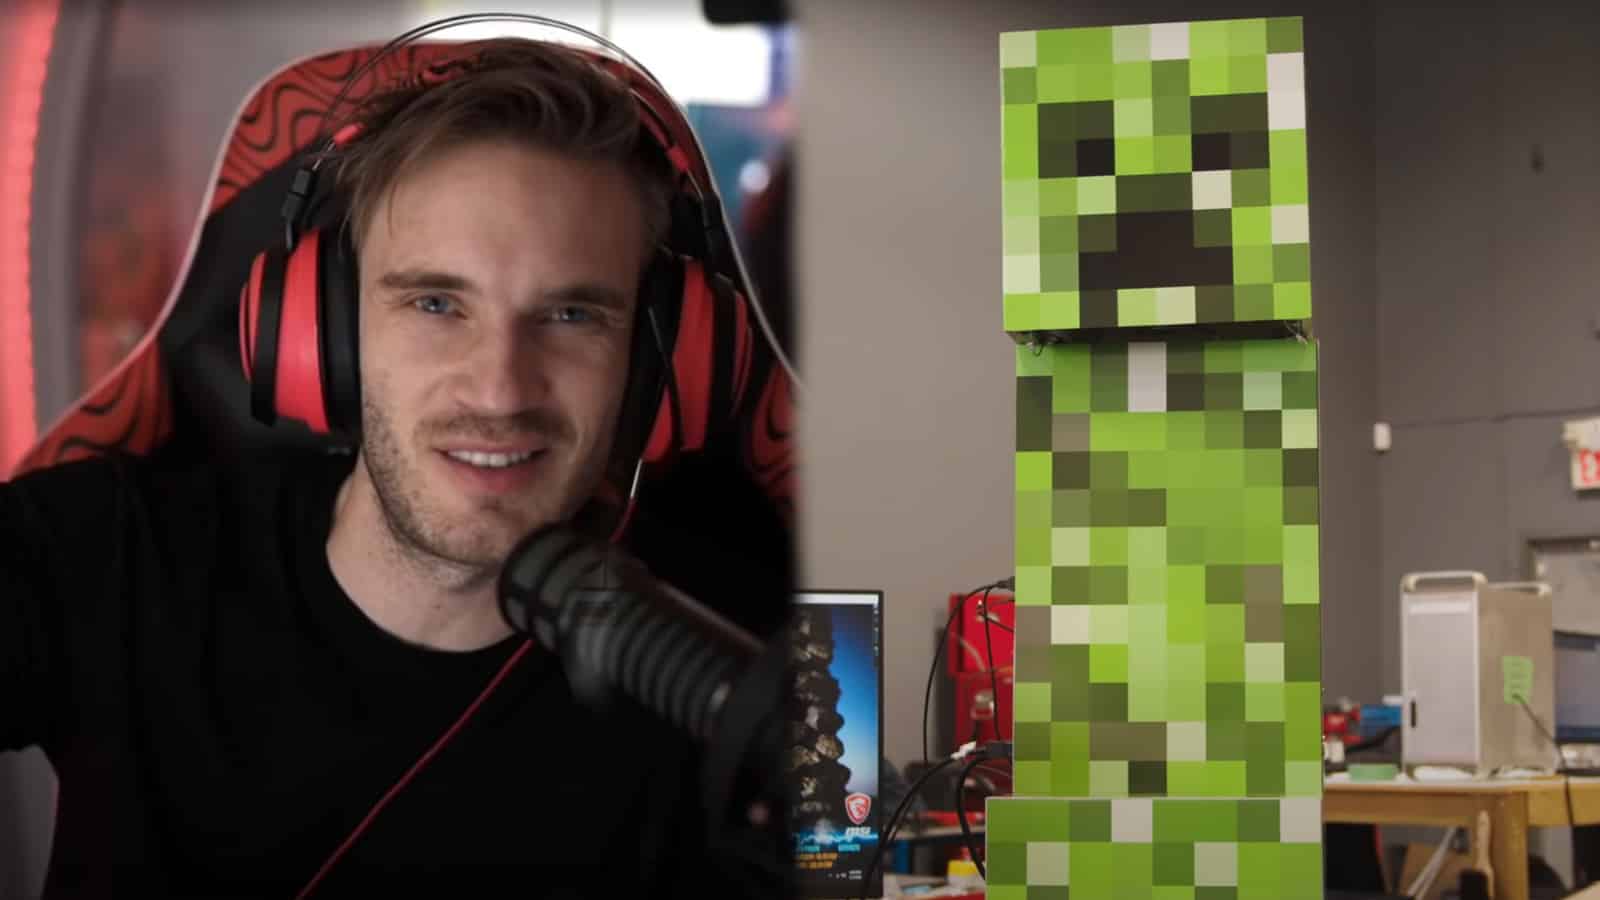 YouTuber PewDiePie next to Linus Tech Tips Minecraft Creeper PC.